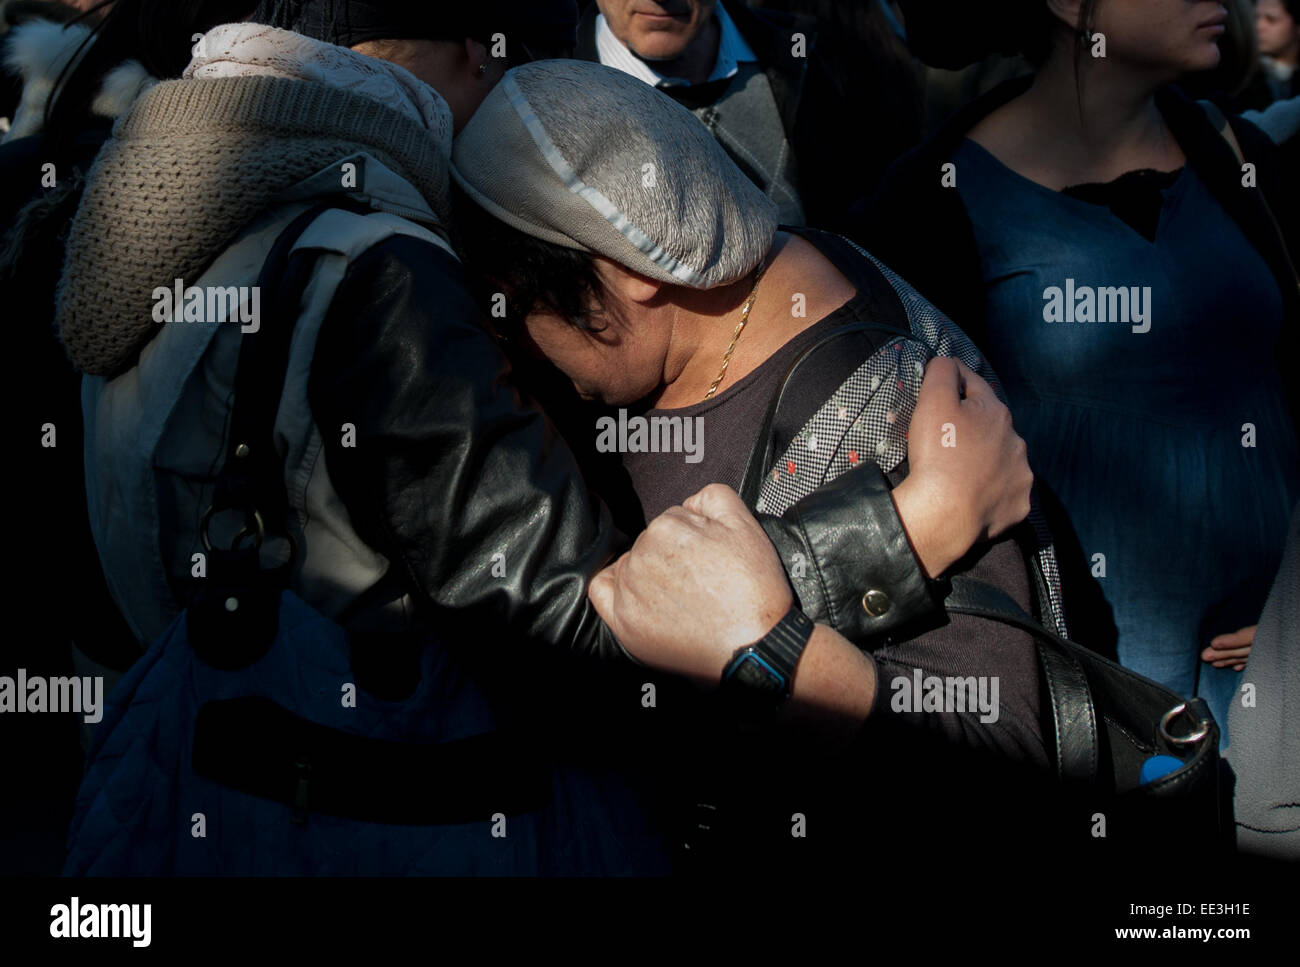 Jeruslaem, Israel. 13th Jan, 2015. People embrace each other during a funeral ceremony for the four victims of Paris supermarket attack at Givat Shaul cemetery, on the outskirts of Jerusalem, on Jan. 13, 2015. Israeli leaders and multitude of mourners gathered Tuesday with the families of four Jewish victims of last week's terror attack on a Paris kosher supermarket for a solemn funeral ceremony at a Jerusalem cemetery. Yoav Hattab, Yohan Cohen, Philippe Braham and Francois-Michel Saada, were gunned down on Friday during a hostage attack in Paris.market in eastern P Credit:  Xinhua/Alamy Live  Stock Photo